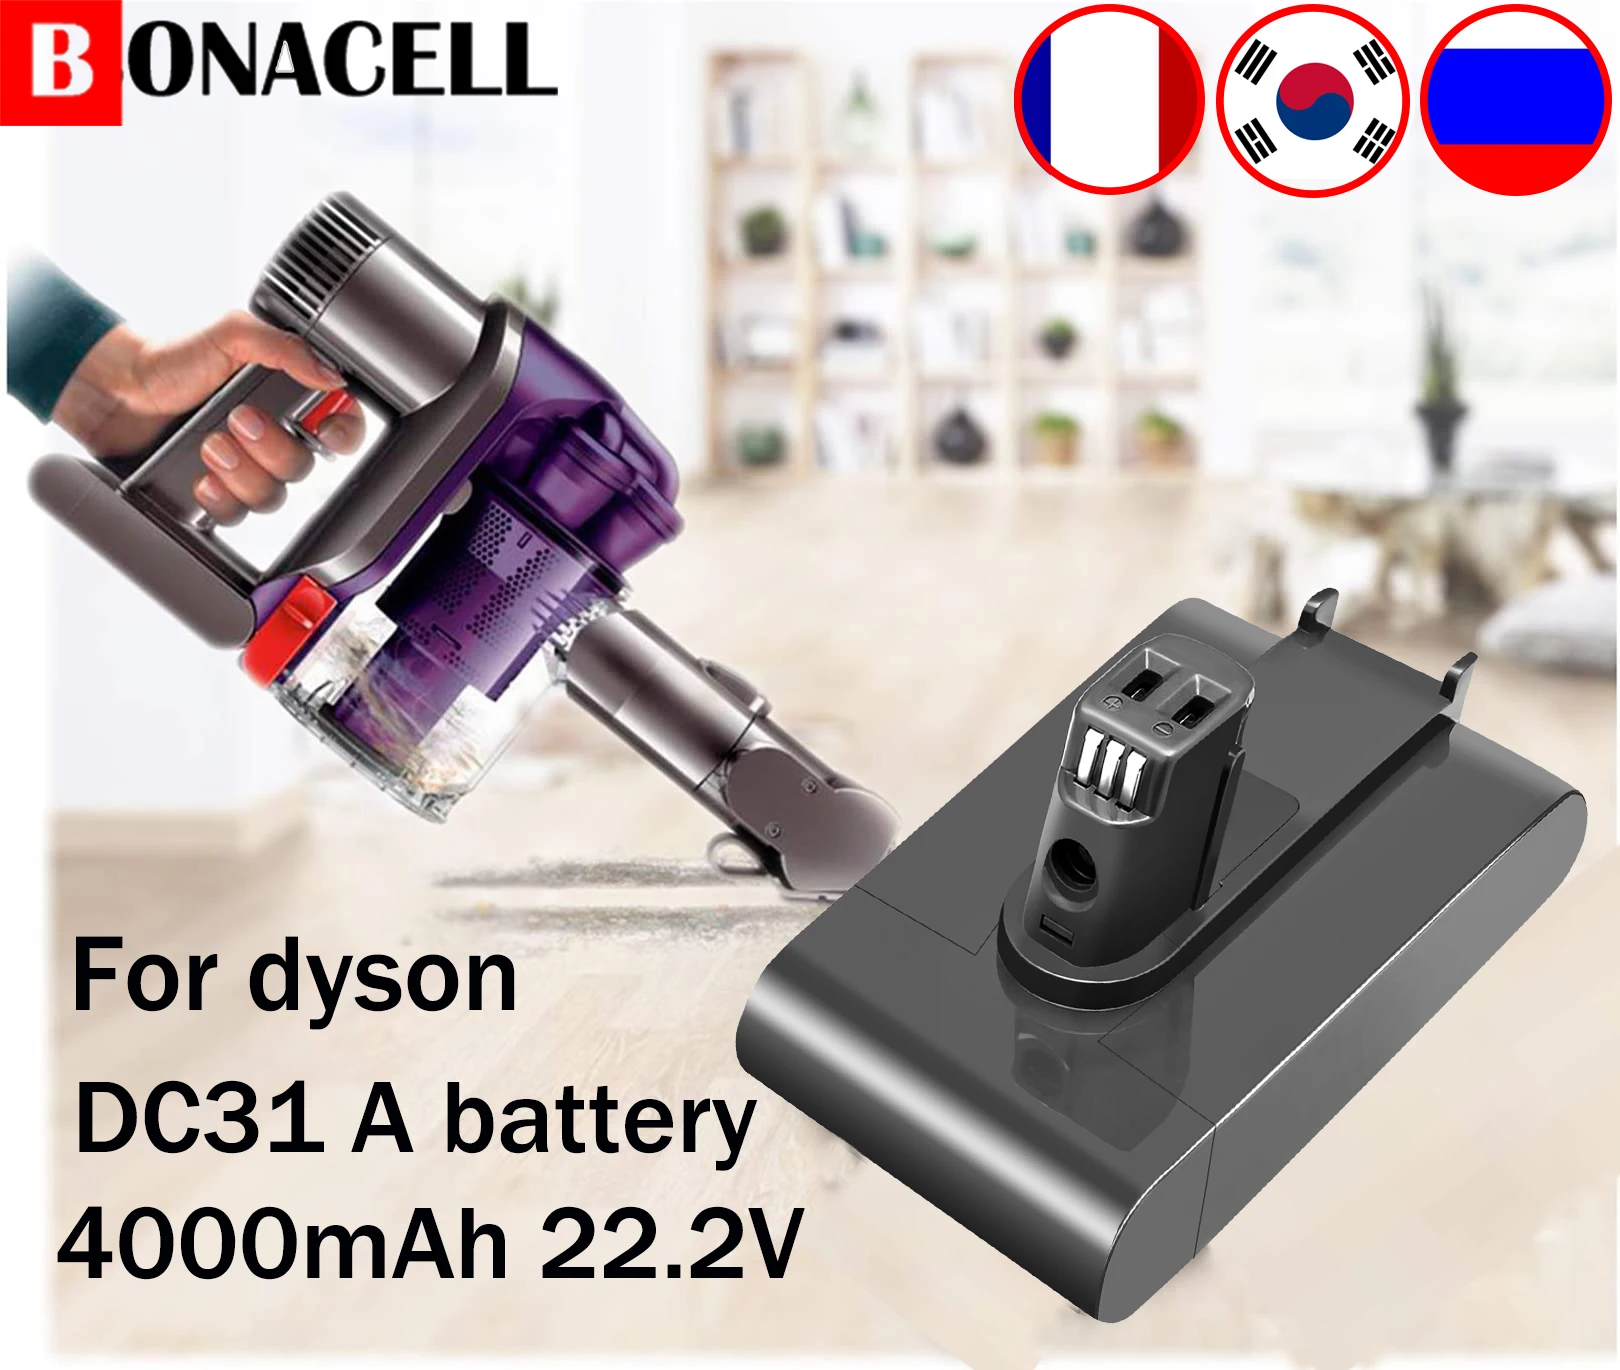 Bonacell 22.2V 4000mAh DC31A Replacement Battery for Dyson Type A DC31 DC34 DC35 DC44 DC45 Animal 917083-01 Handheld Vacuum